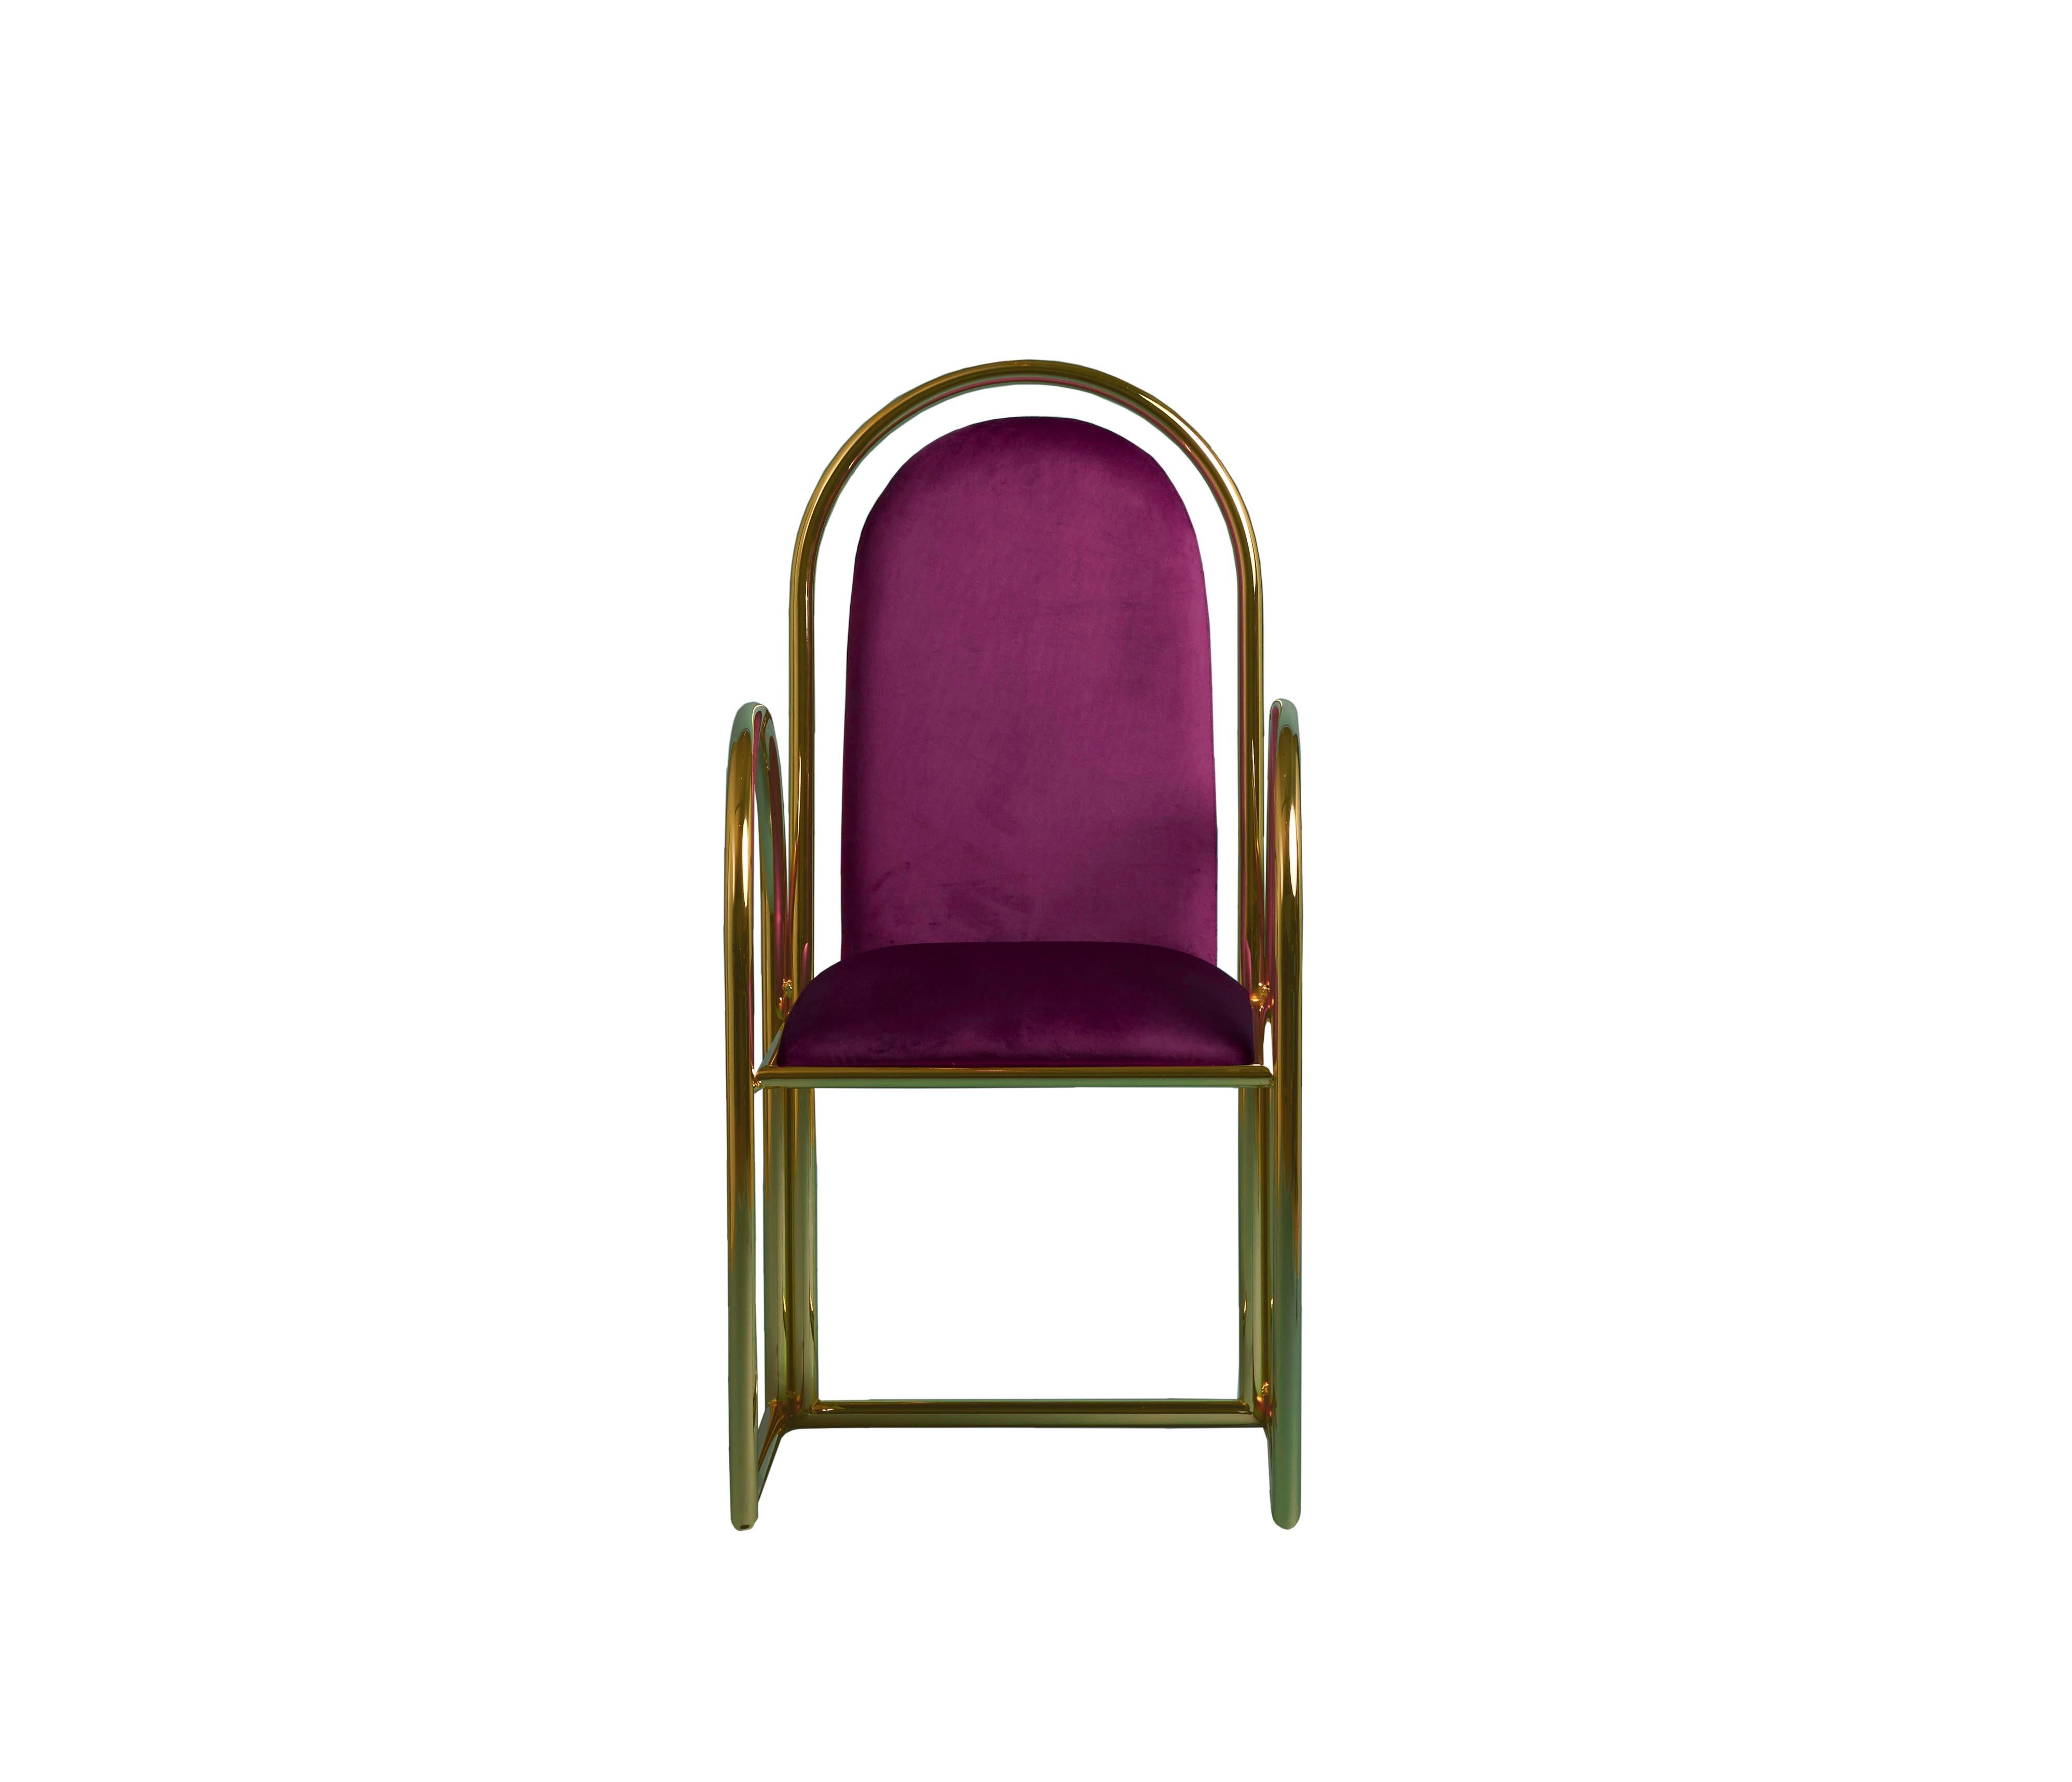 Spanish Set of 3 Arco Chair by Houtique